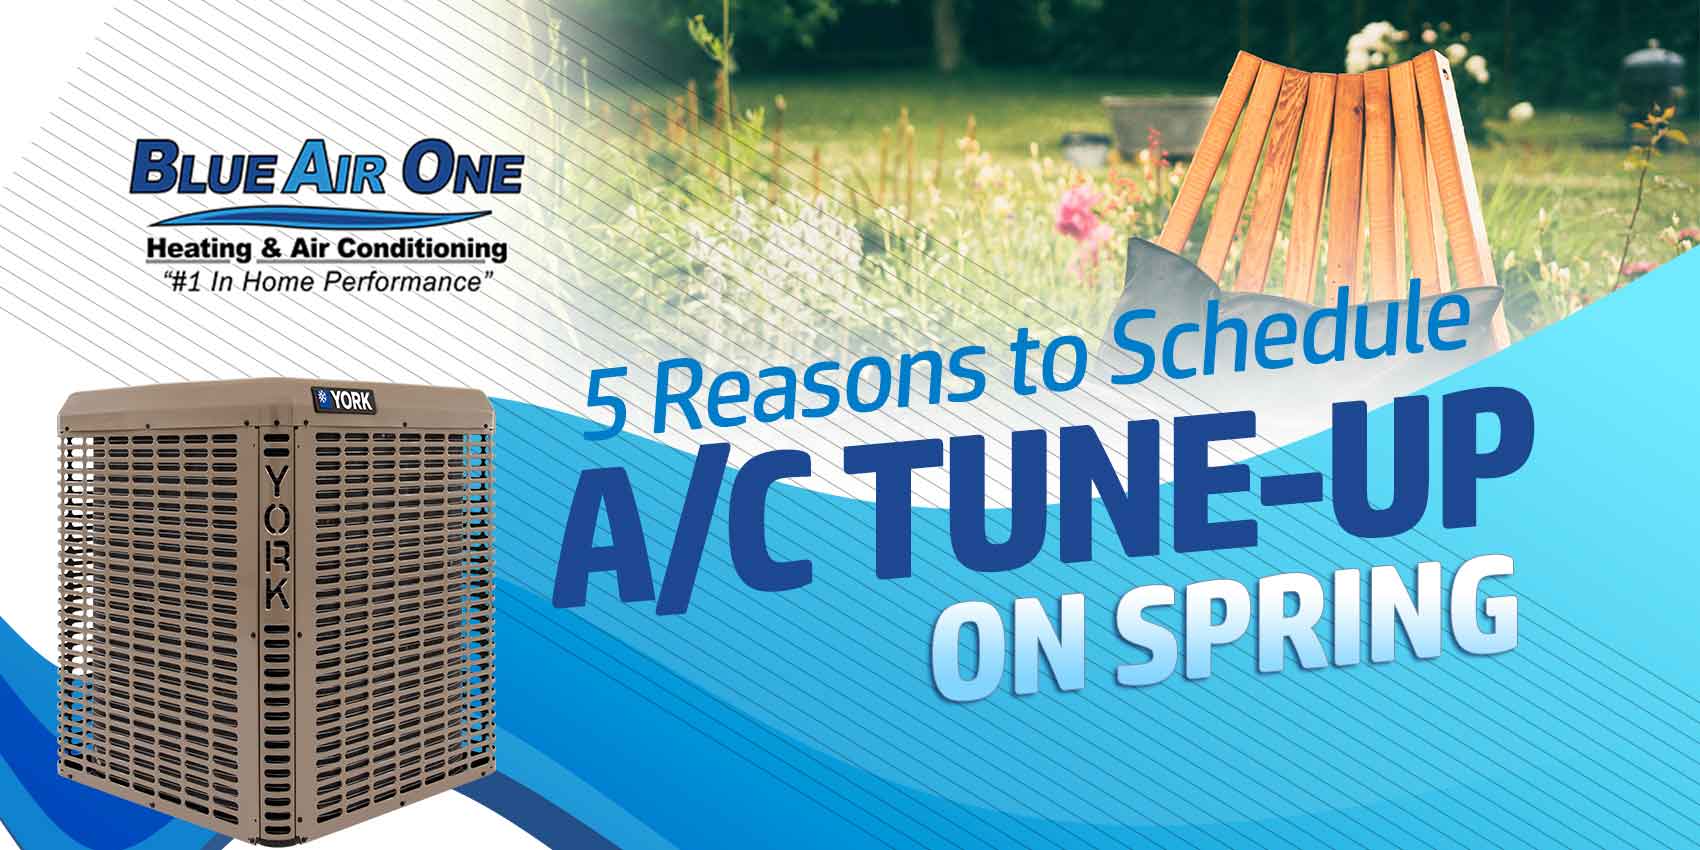 5 Reasons to Schedule A/C Maintenance on Spring